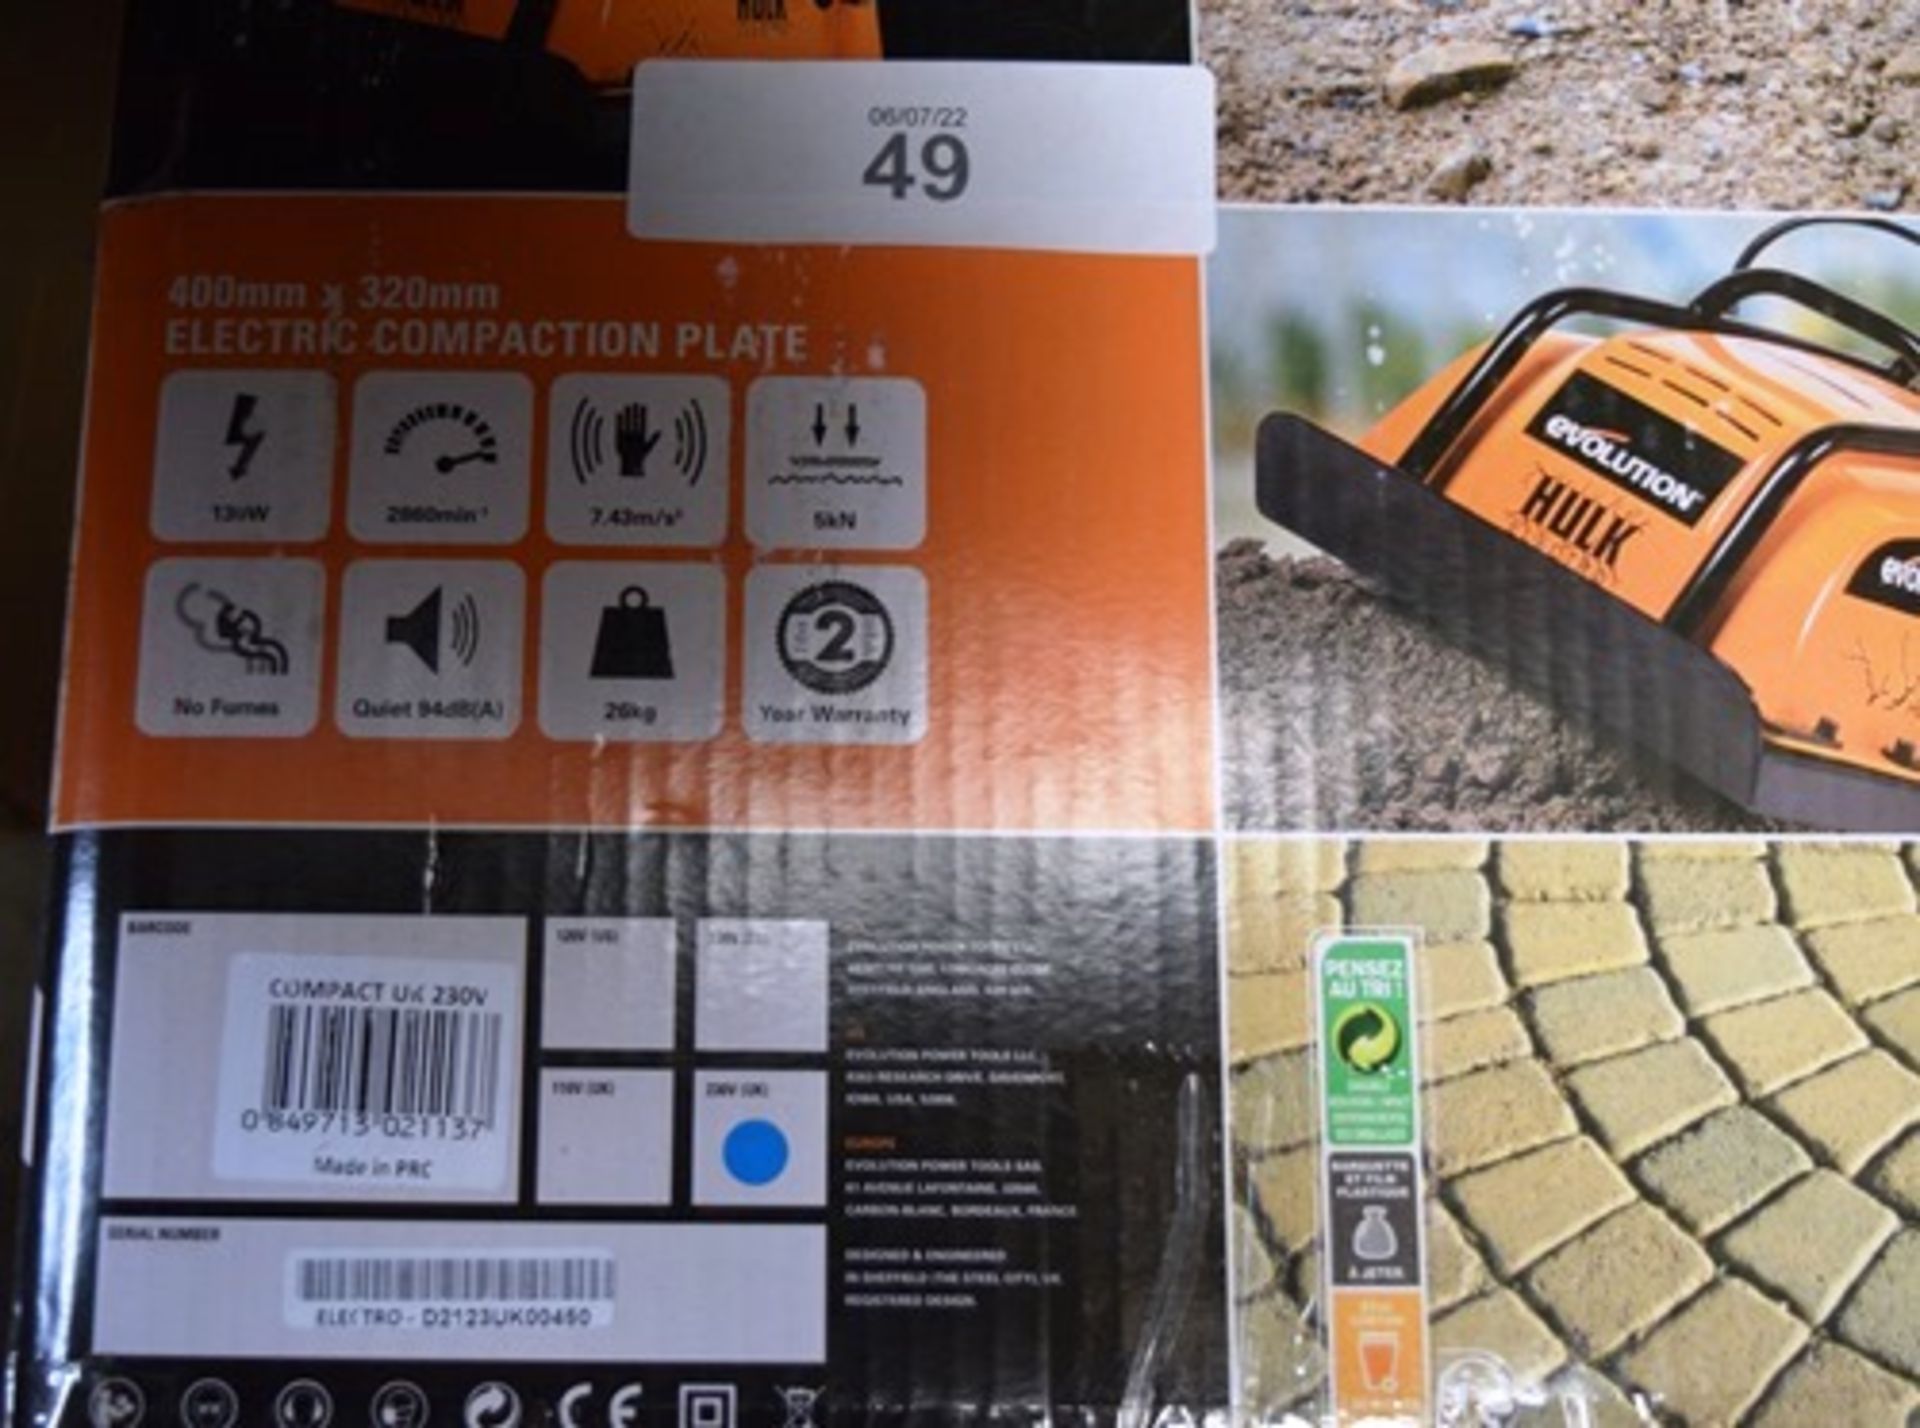 1 x Evolution Hulk electric compaction plate, plate size 400mm x 320mm, 230V - New in box (BRSW) - Image 3 of 3